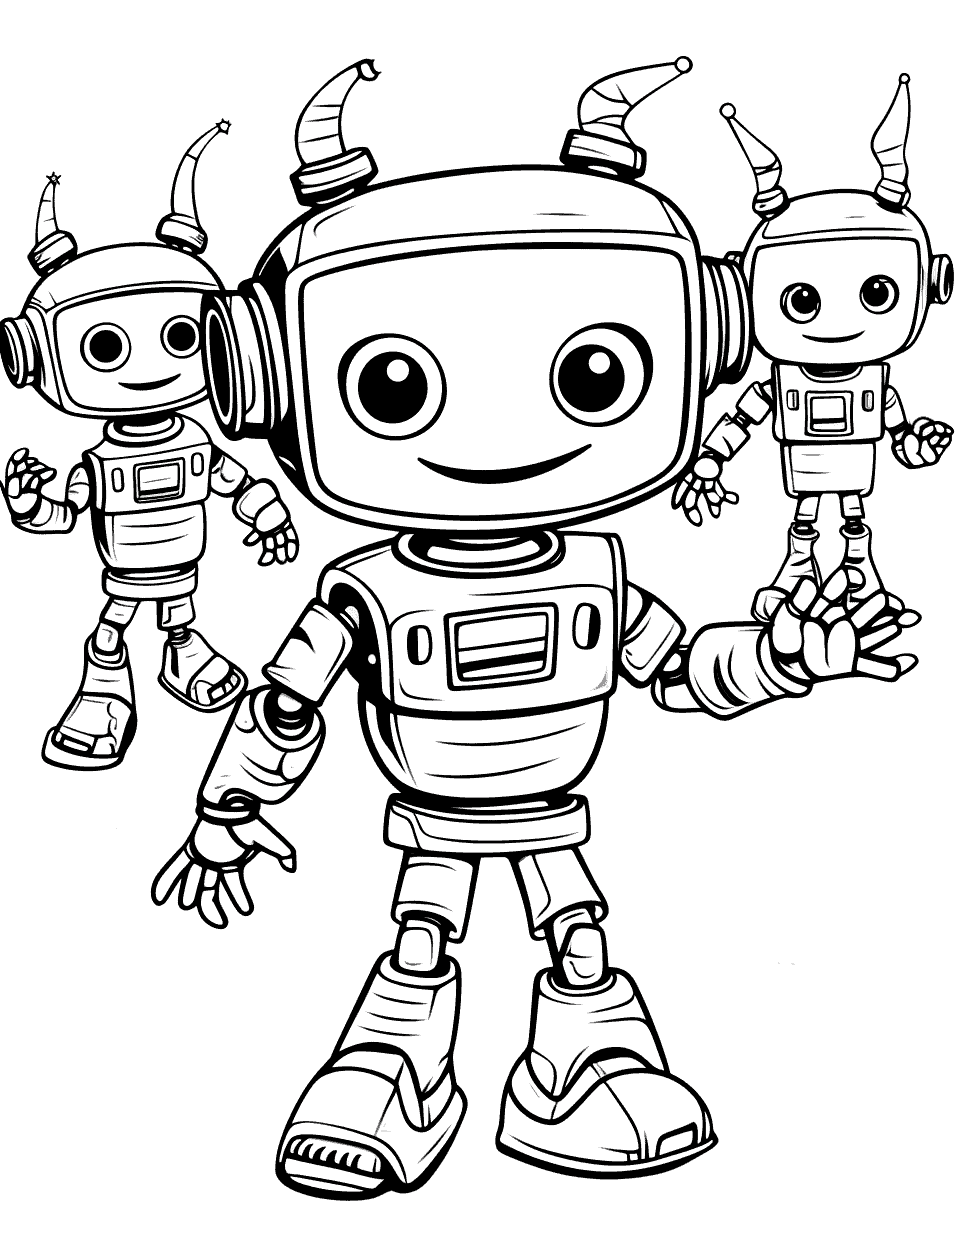 Fun Robot Dance Party Coloring Page - A group of robots having a dance party.